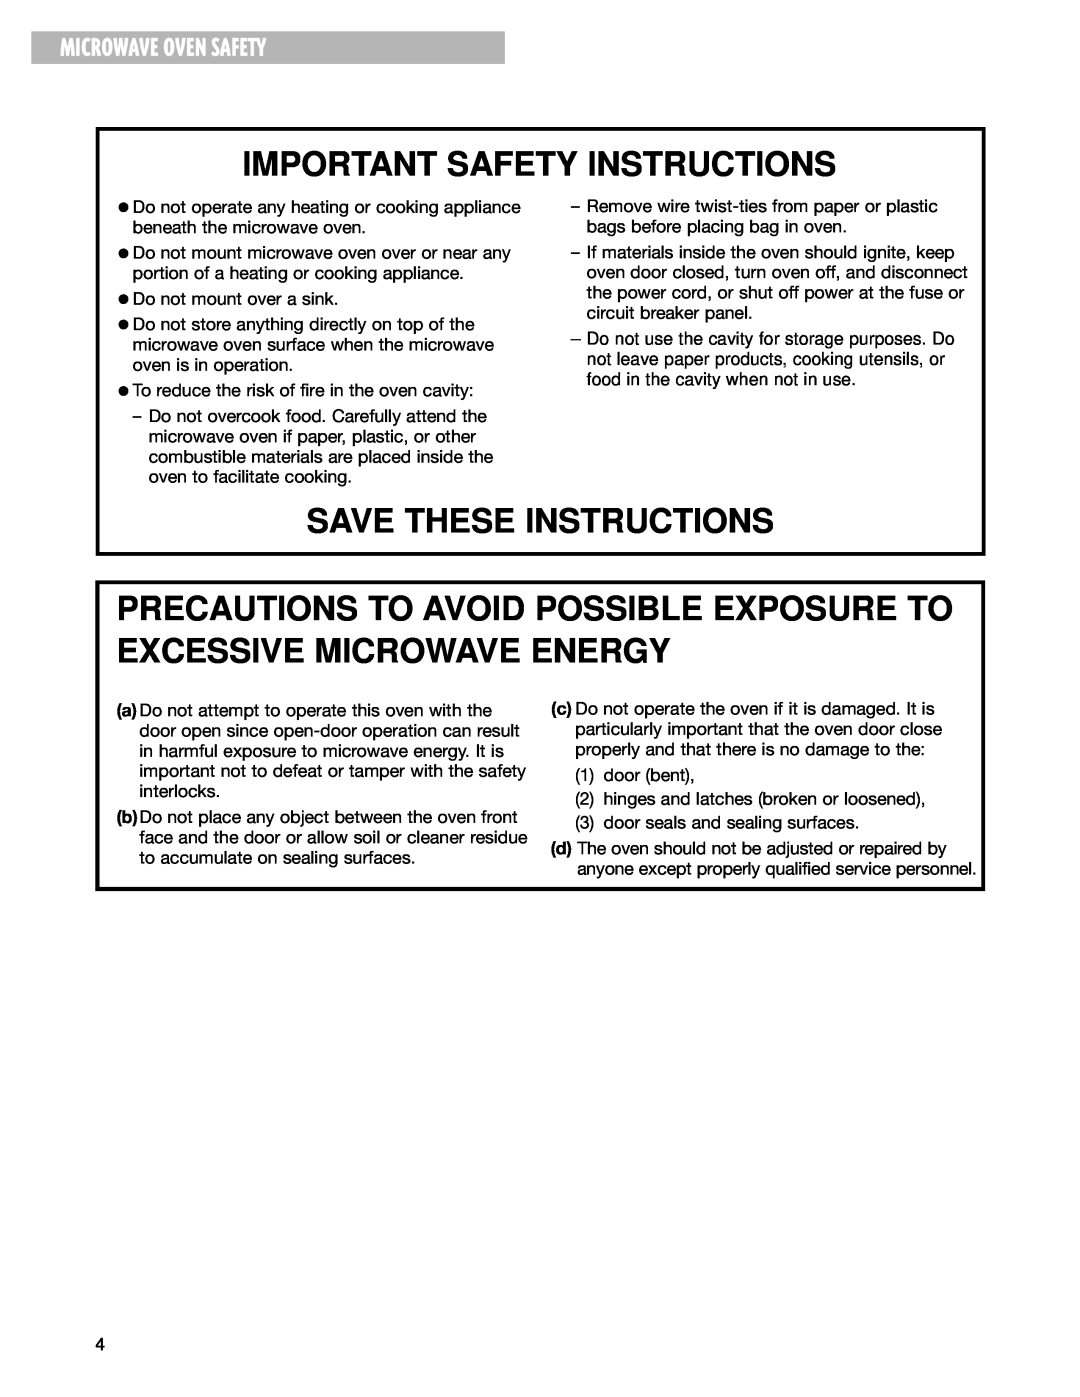 Whirlpool MT3185SH installation instructions Microwave Oven Safety, Important Safety Instructions, Save These Instructions 